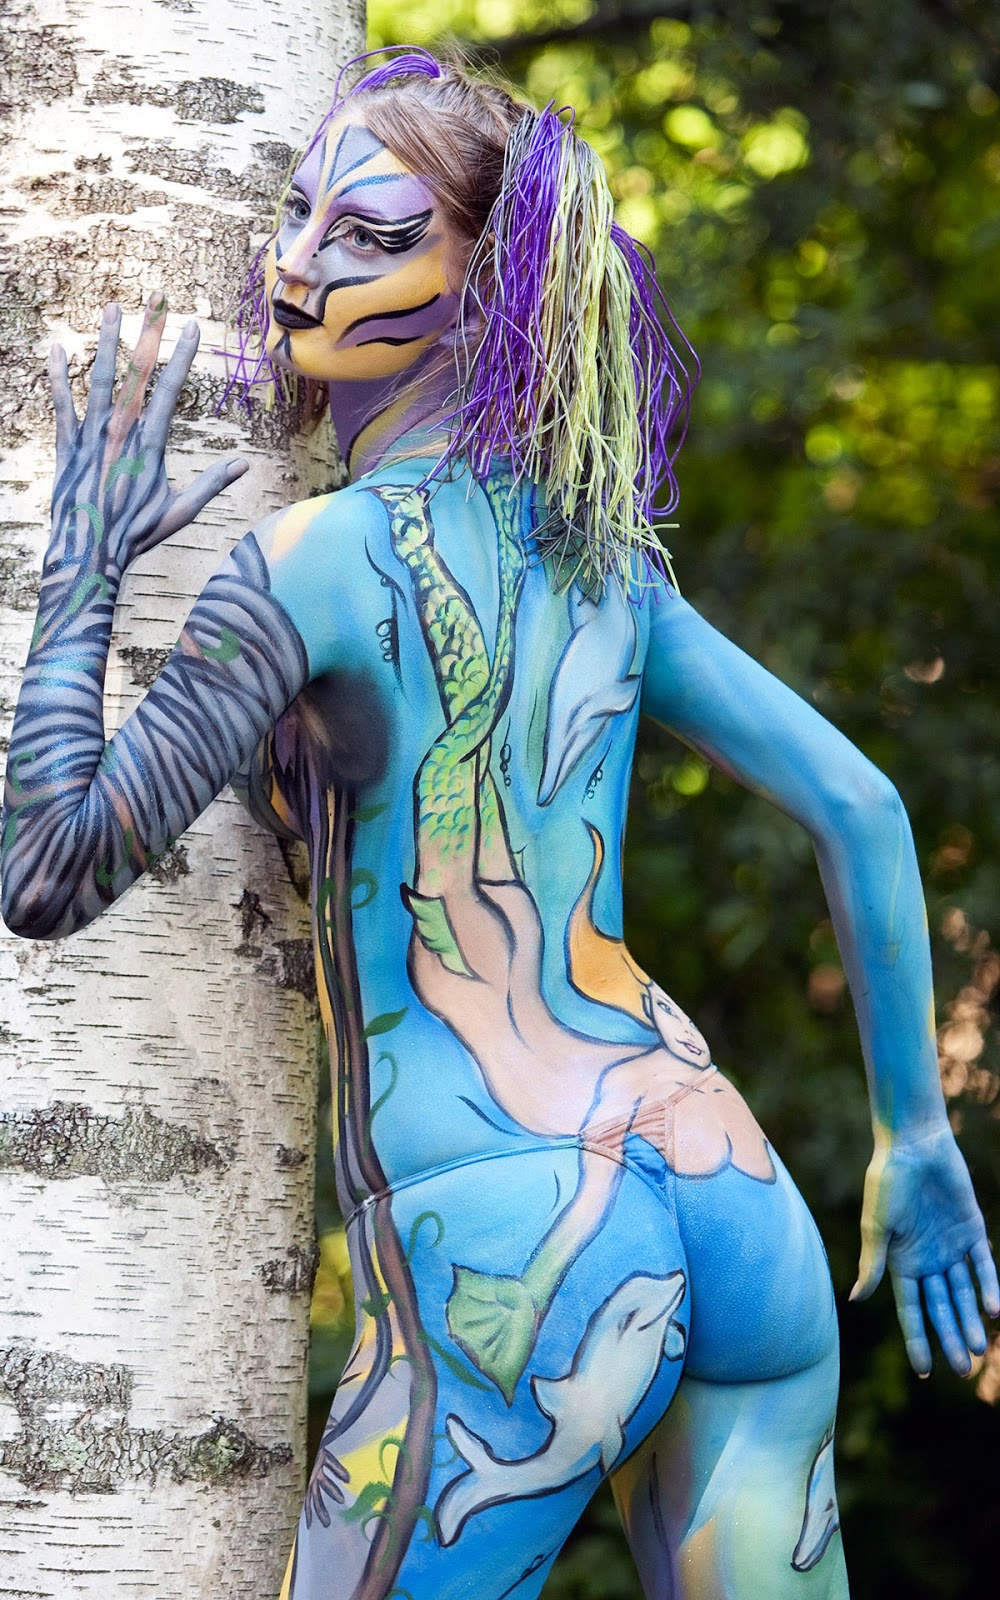 Wallpapers 4 download: 40 Artistic Body Painting Girls ...